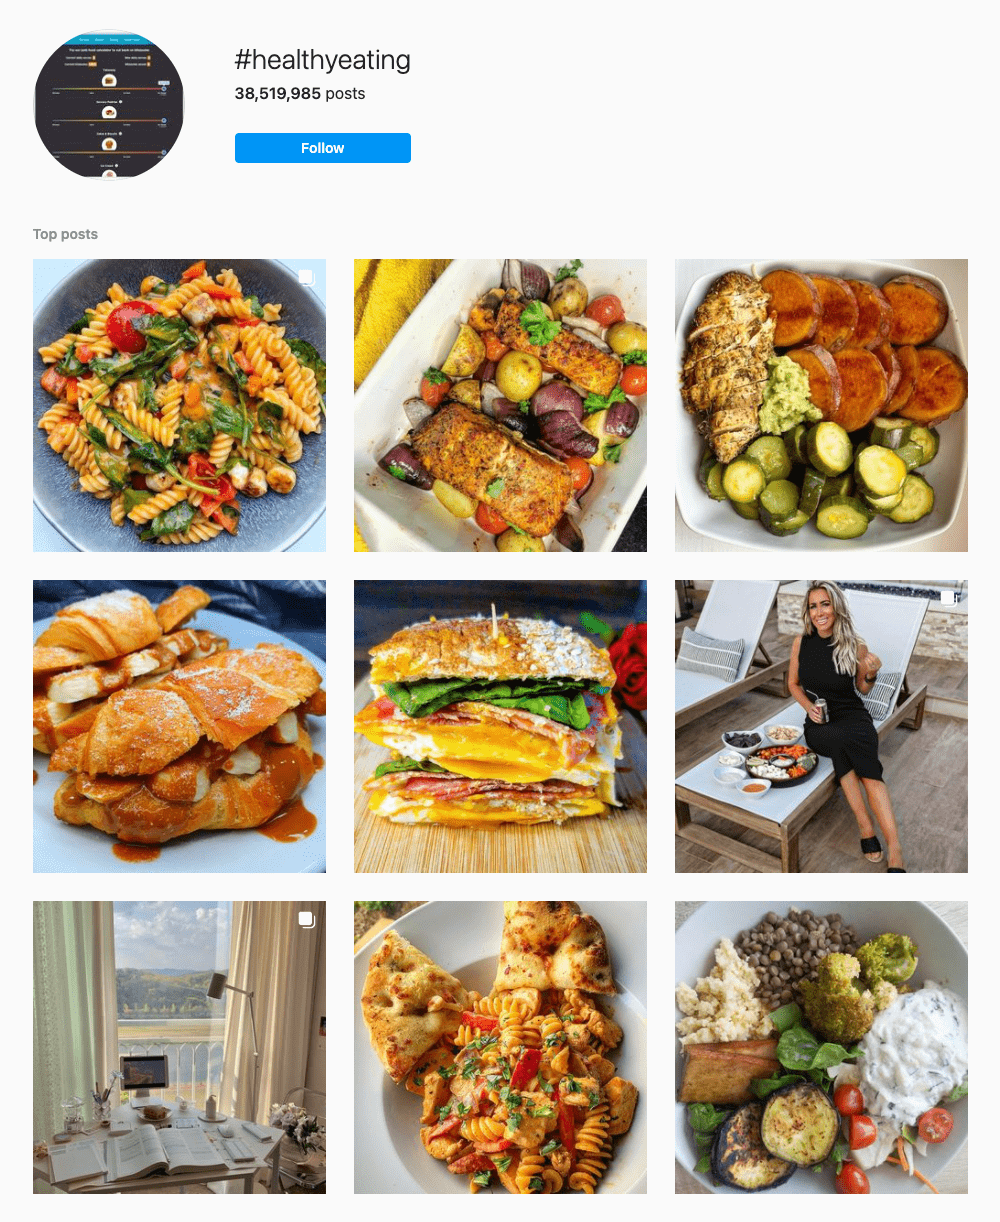 #healthyeating Hashtags for Instagram